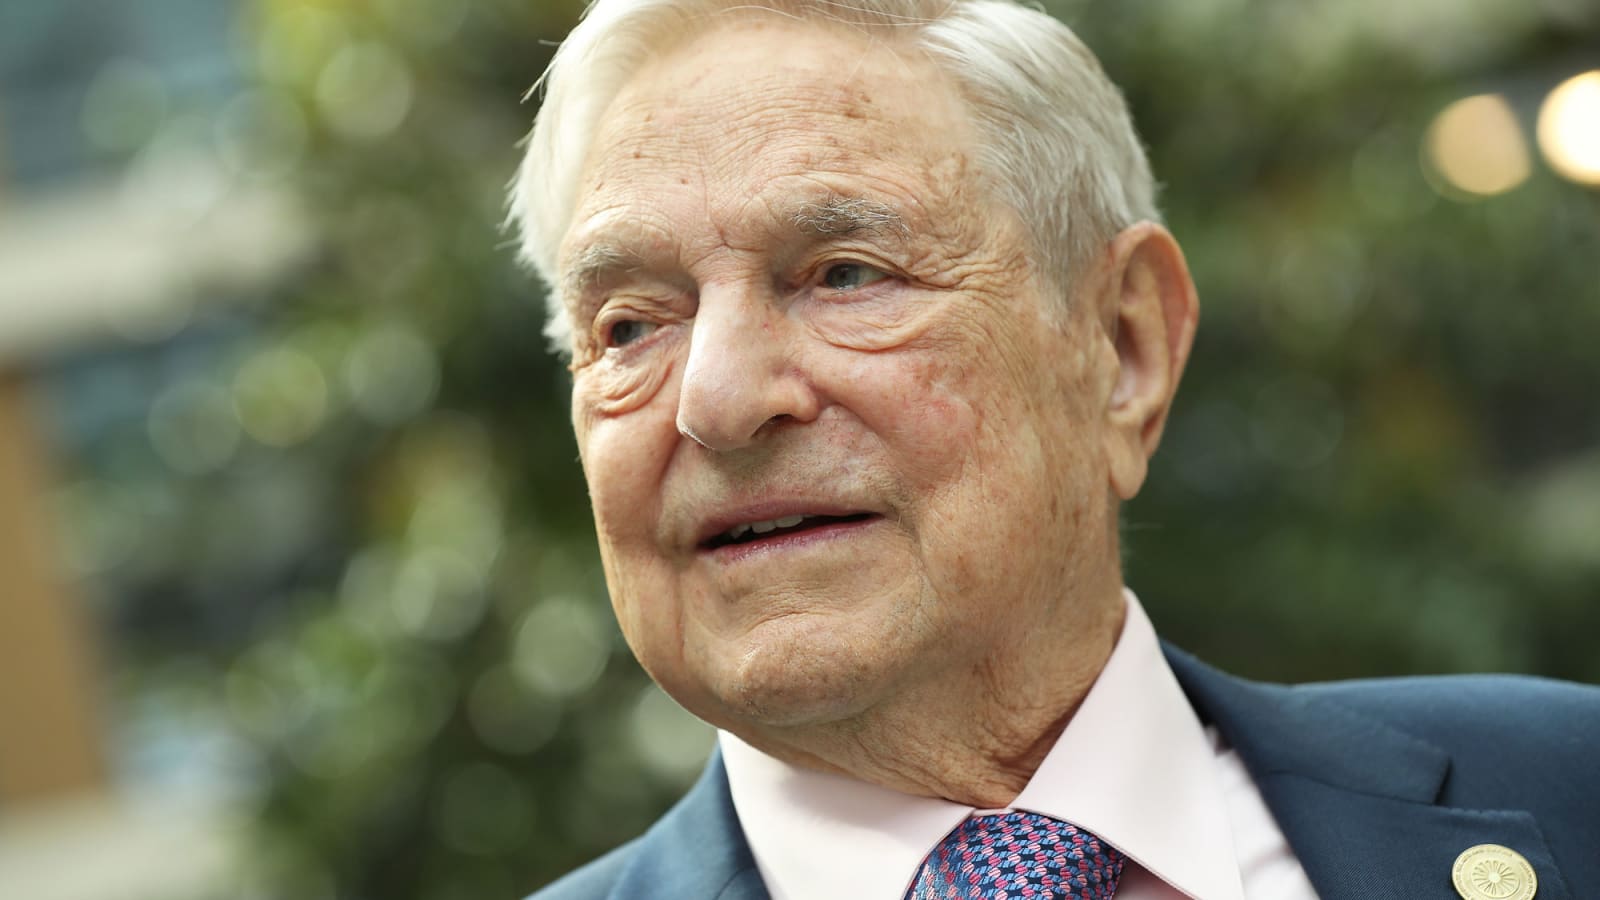 Philanthropist George Soros donates most of his net worth to charity